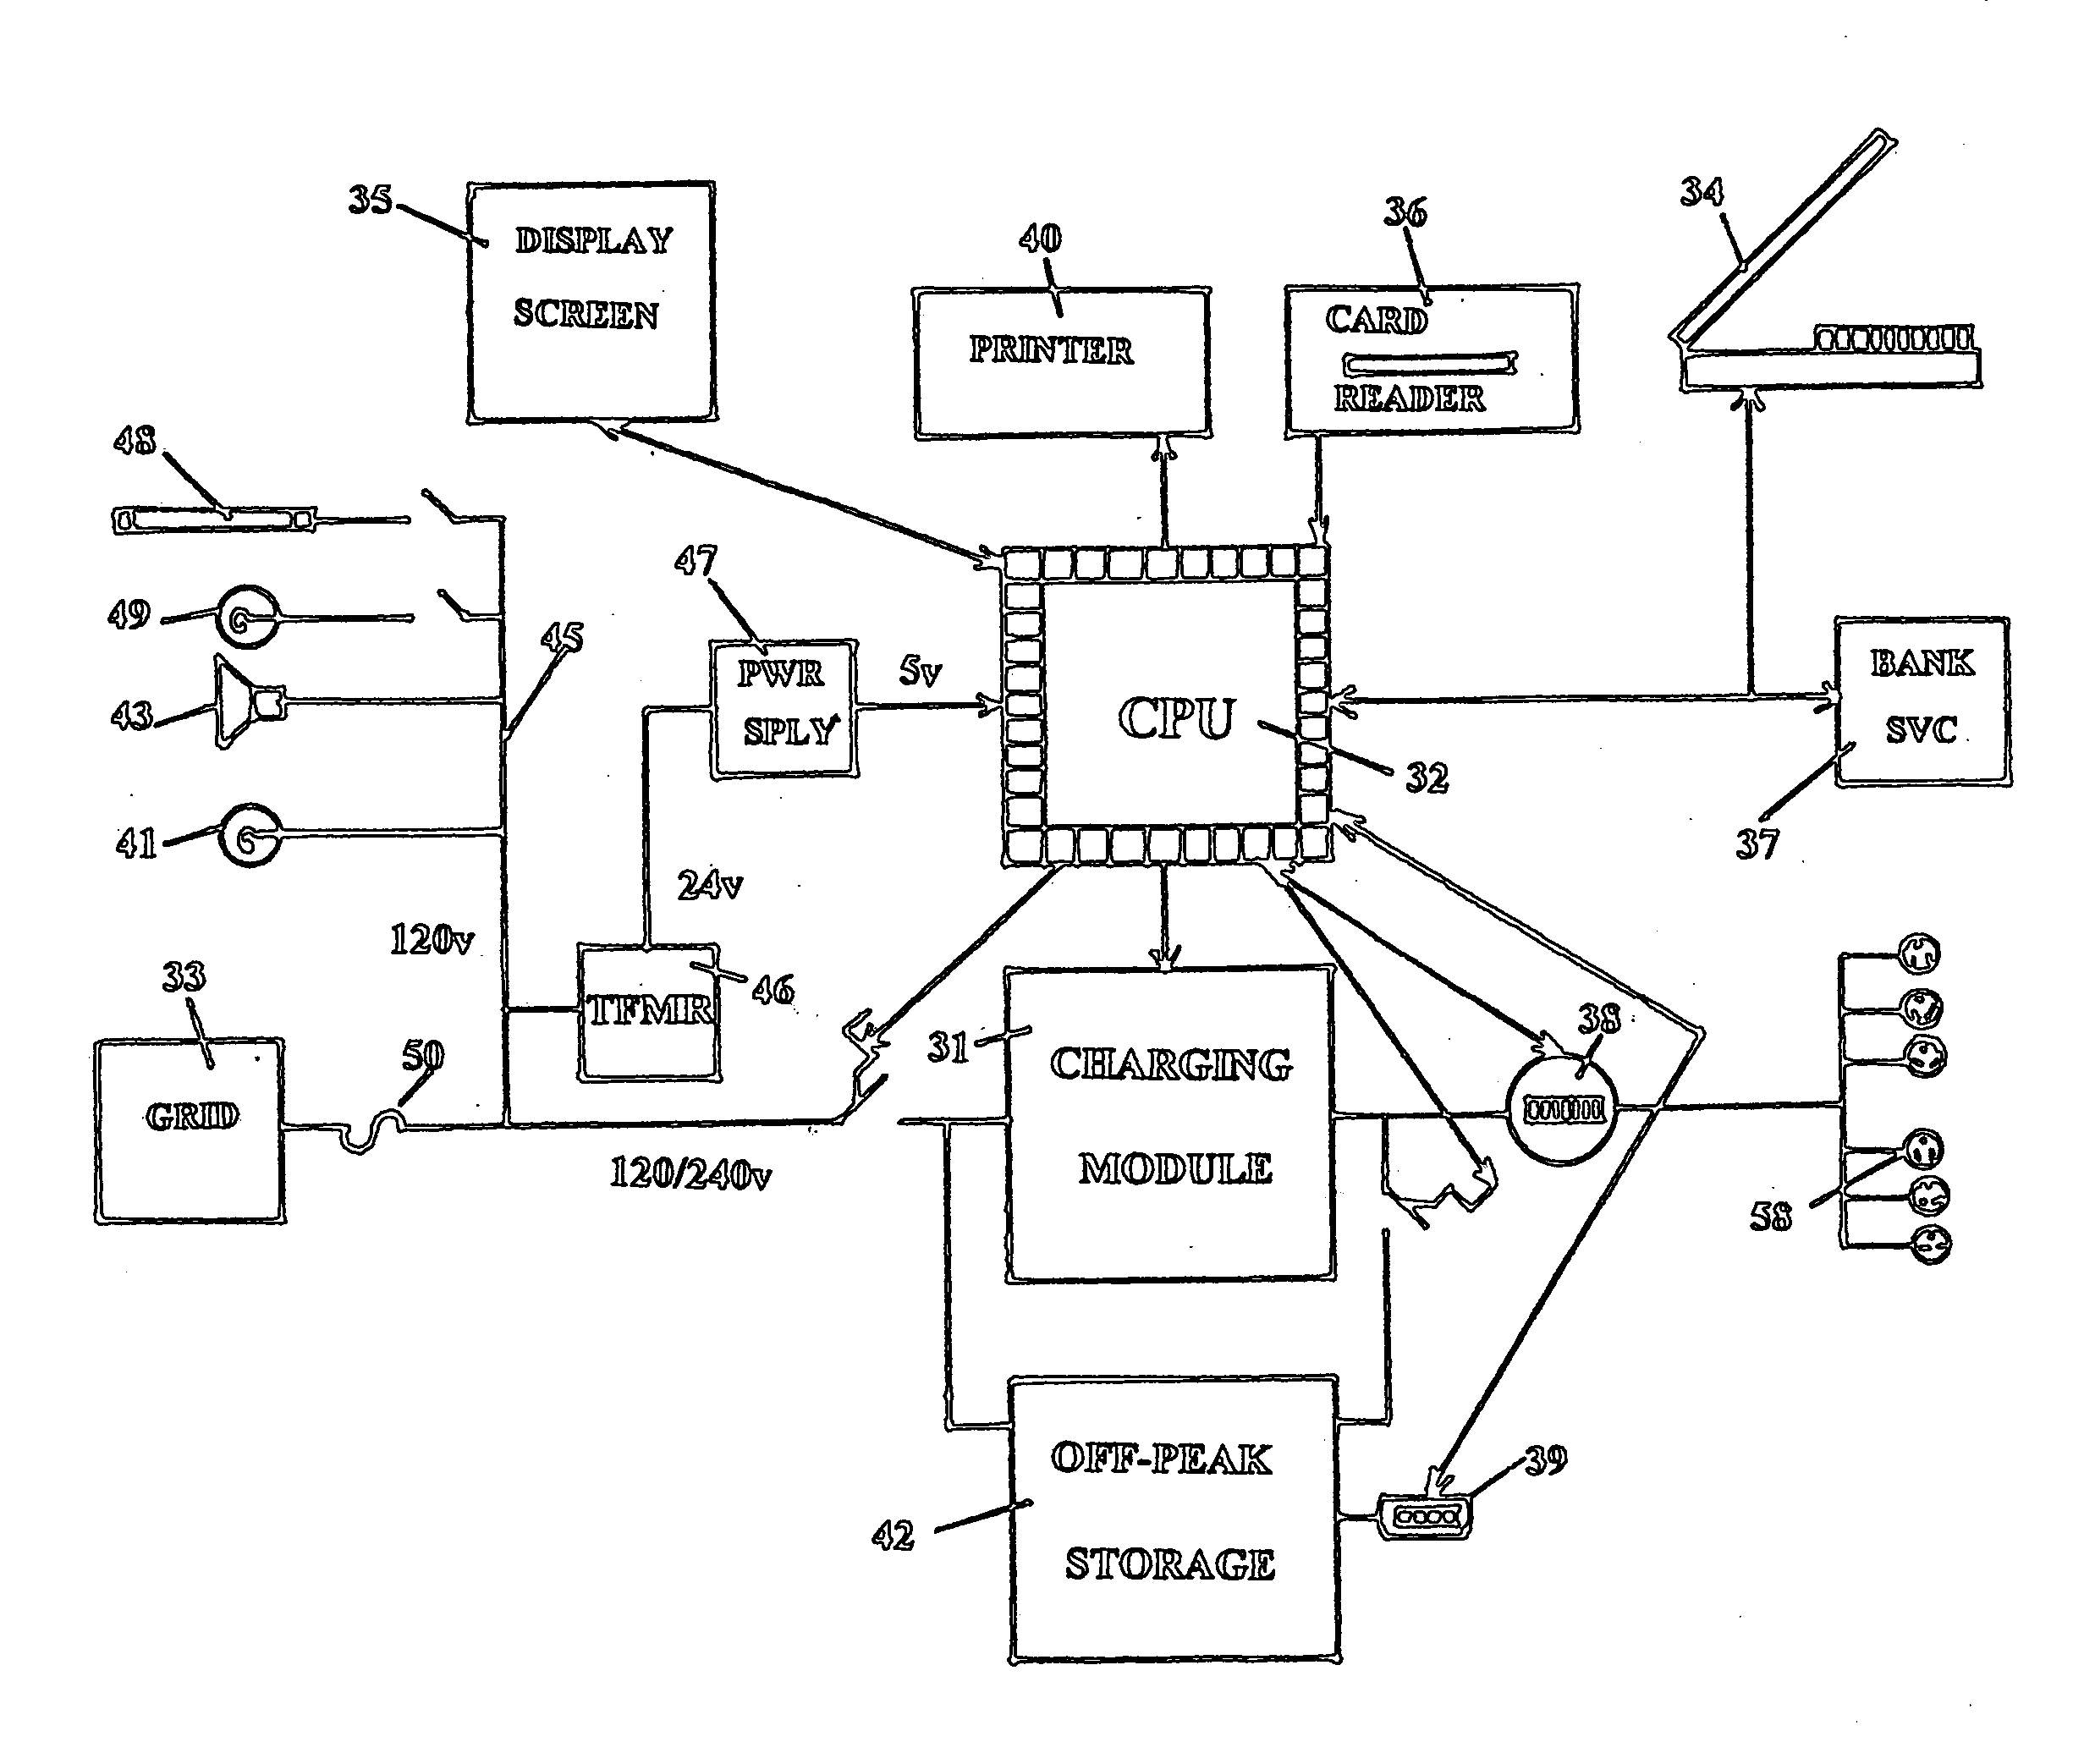 Method for pay-per-use, self-service charging of electric automobiles